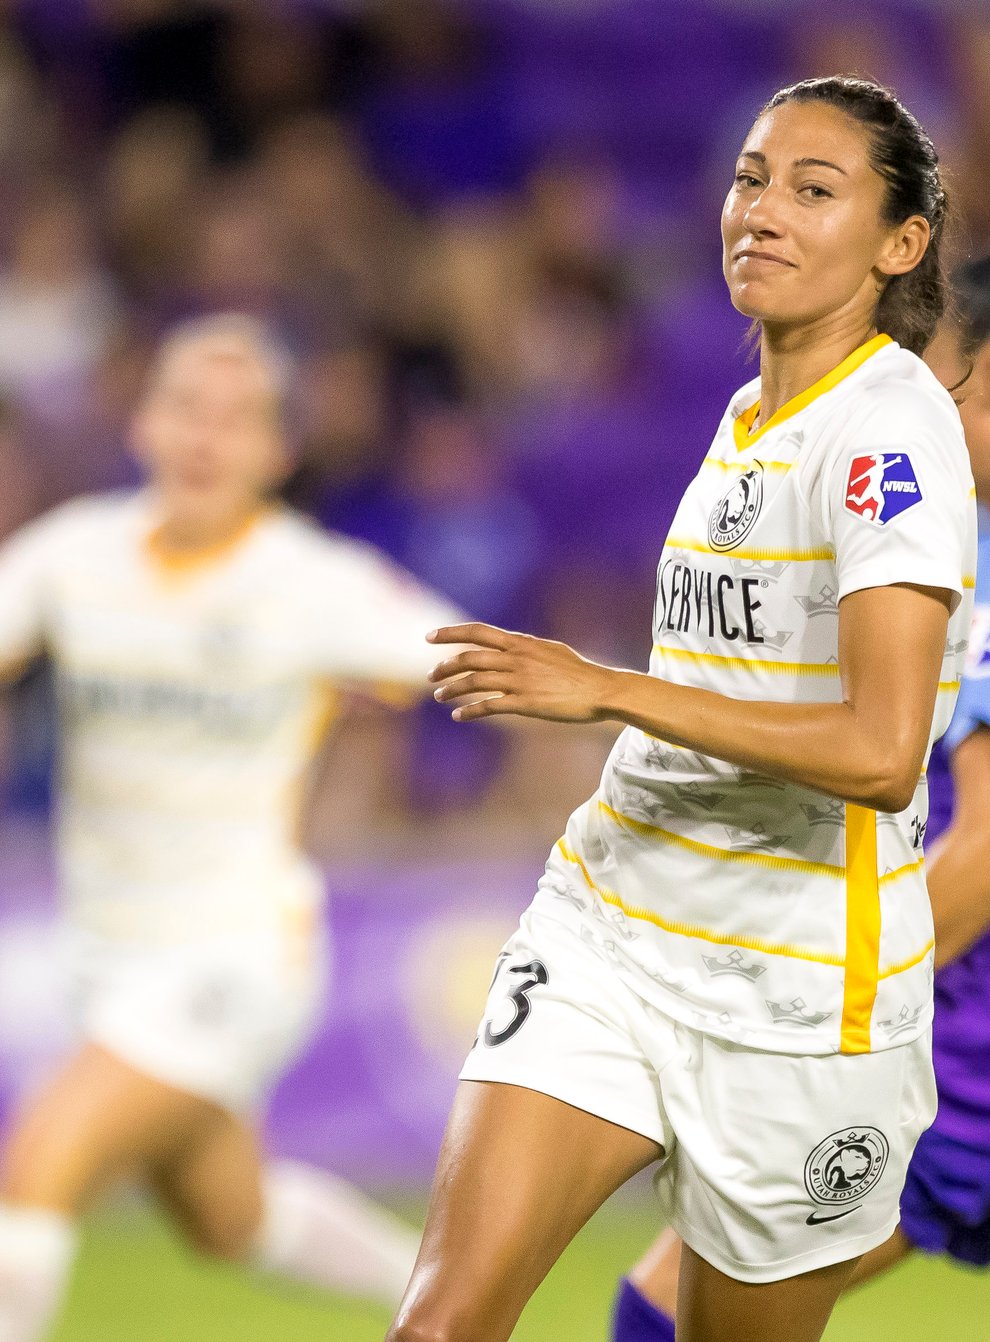 Christen Press, along with her Utah Royals team mates, are now allowed to train in small groups